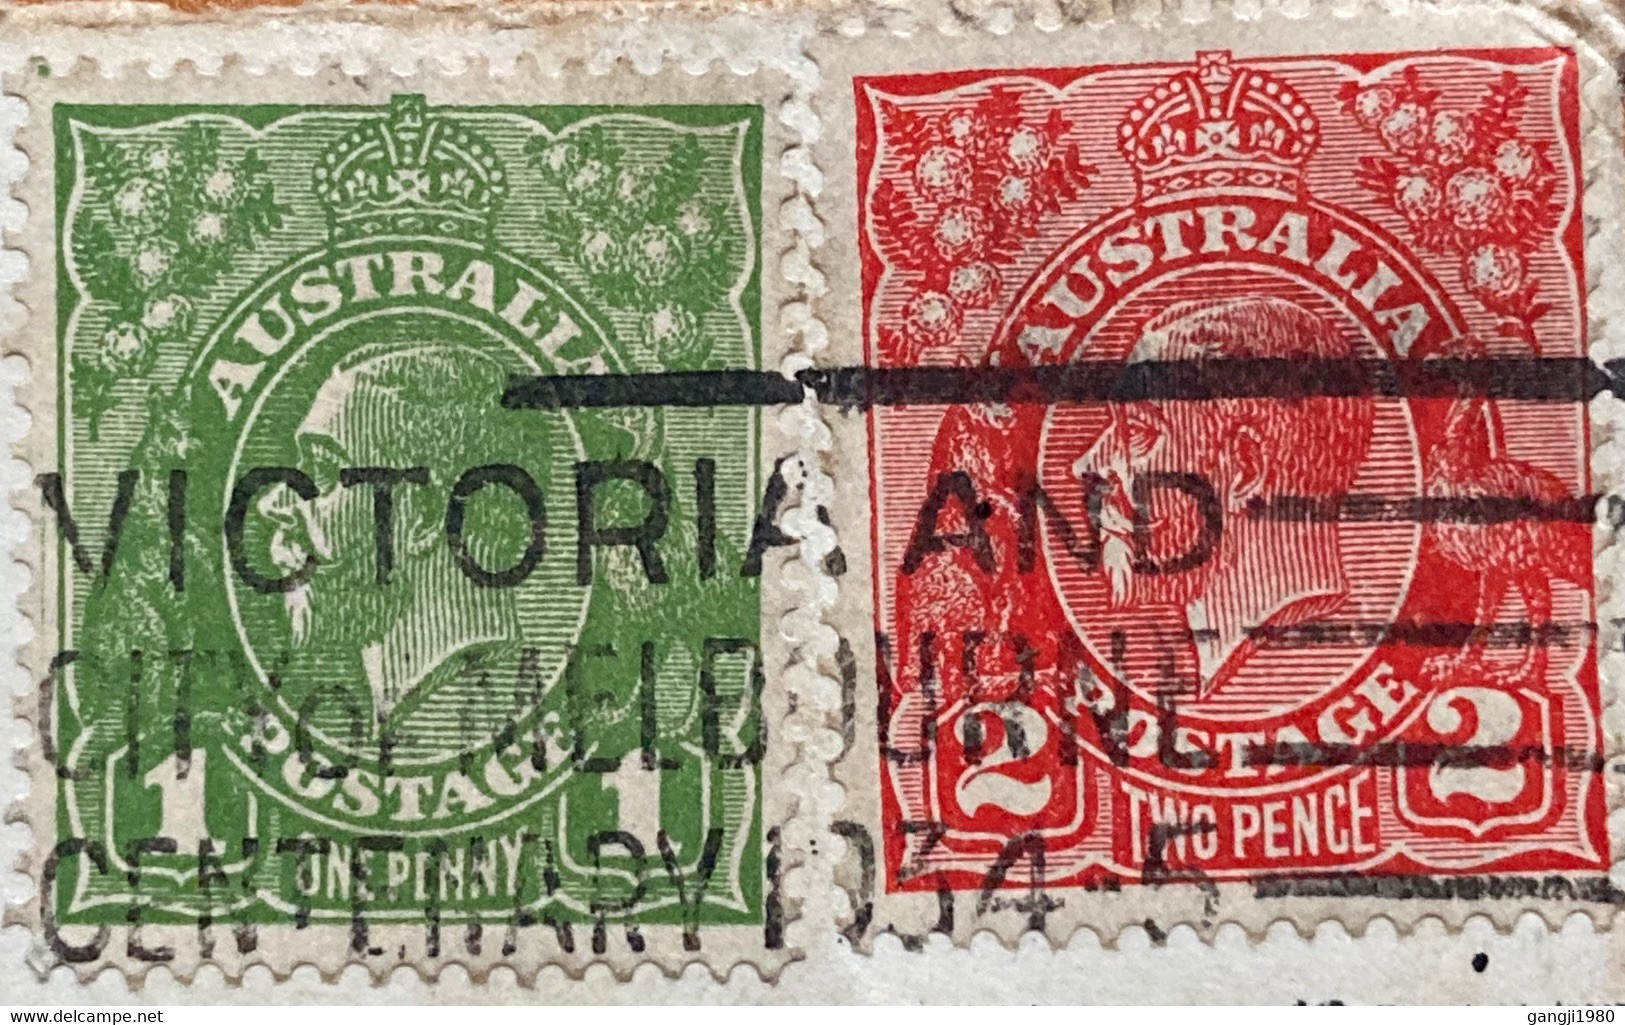 AUSTRALIA 1934, KING GEORGE 2 STAMPS,SLOGAN VICTORIA & CITY MELBOURNE CENTENARY-1934 WITH SPECIAL PREPRINTED USED COVER - Storia Postale